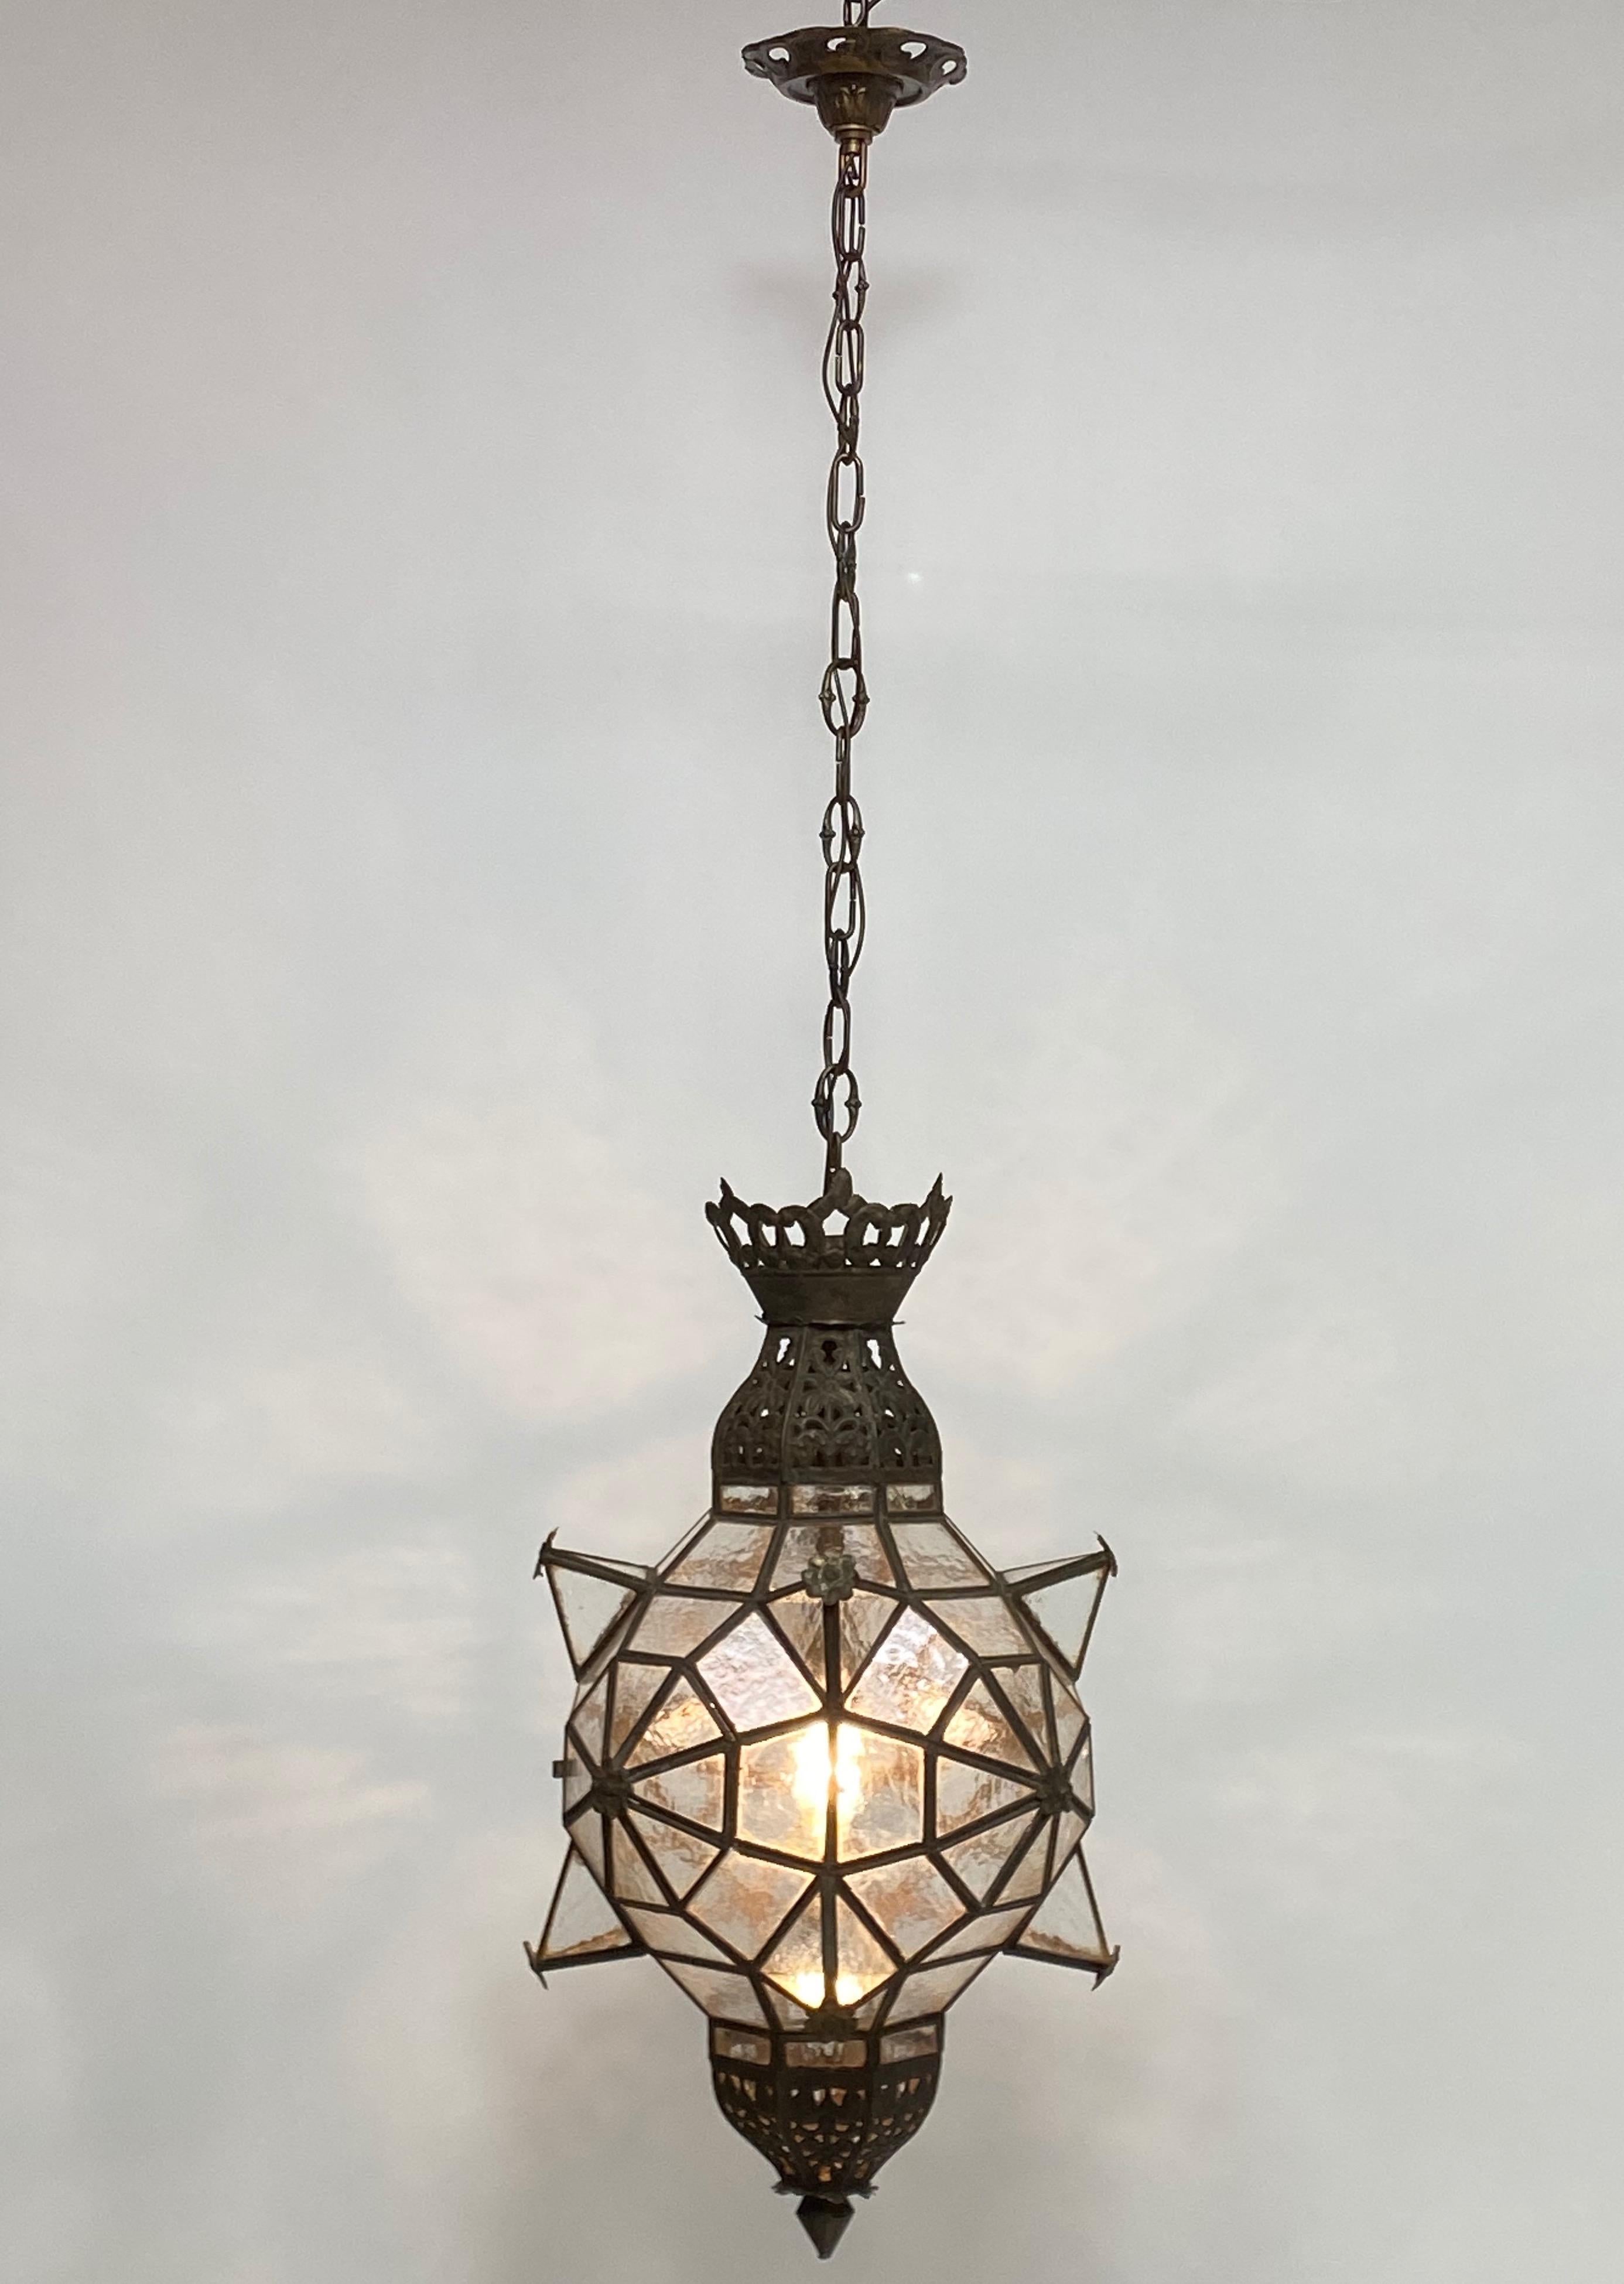 Wonderful old handcrafted Moorish style lantern having its original glass panels and patina. Originally this light fixture held candles but is now electrified, holds a single standard size bulb.
In superb condition.
Early 20th century (possibly